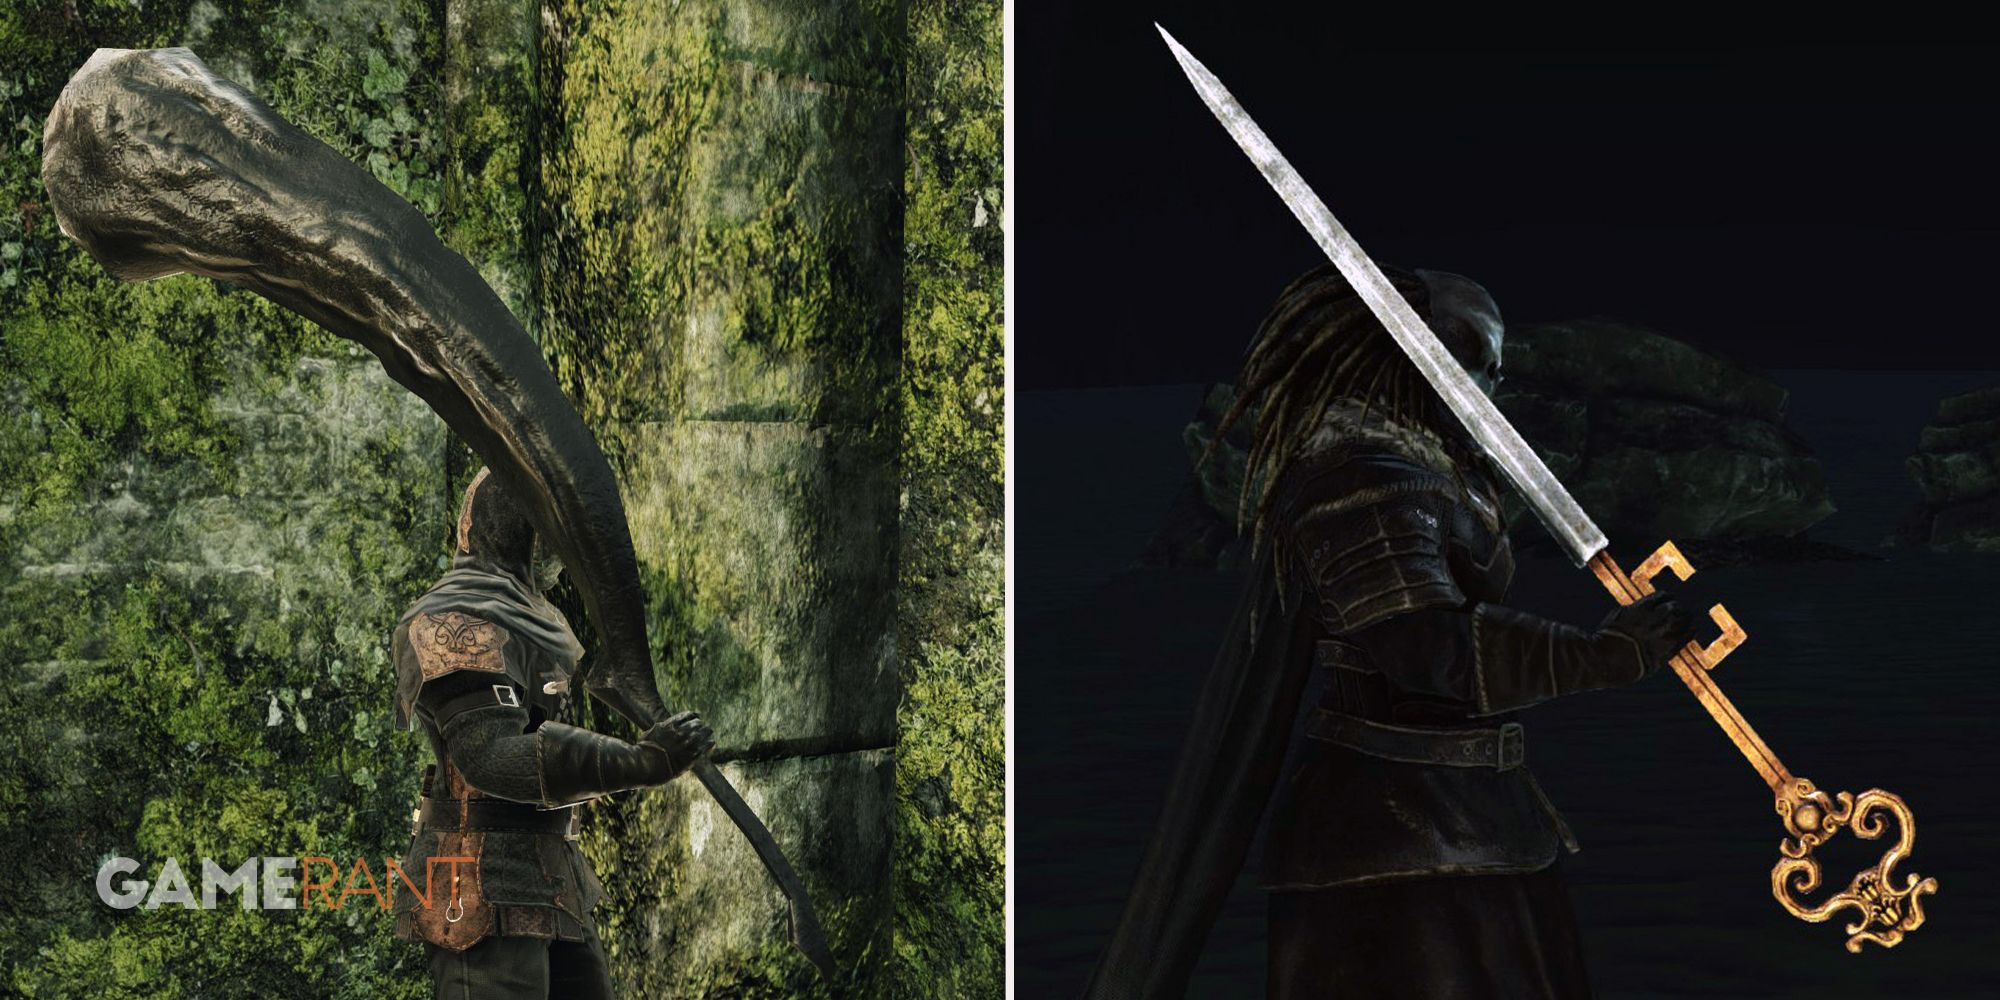 Dark Souls Dragon’s Tooth weapon on left, Key To The Embedded weapon on right